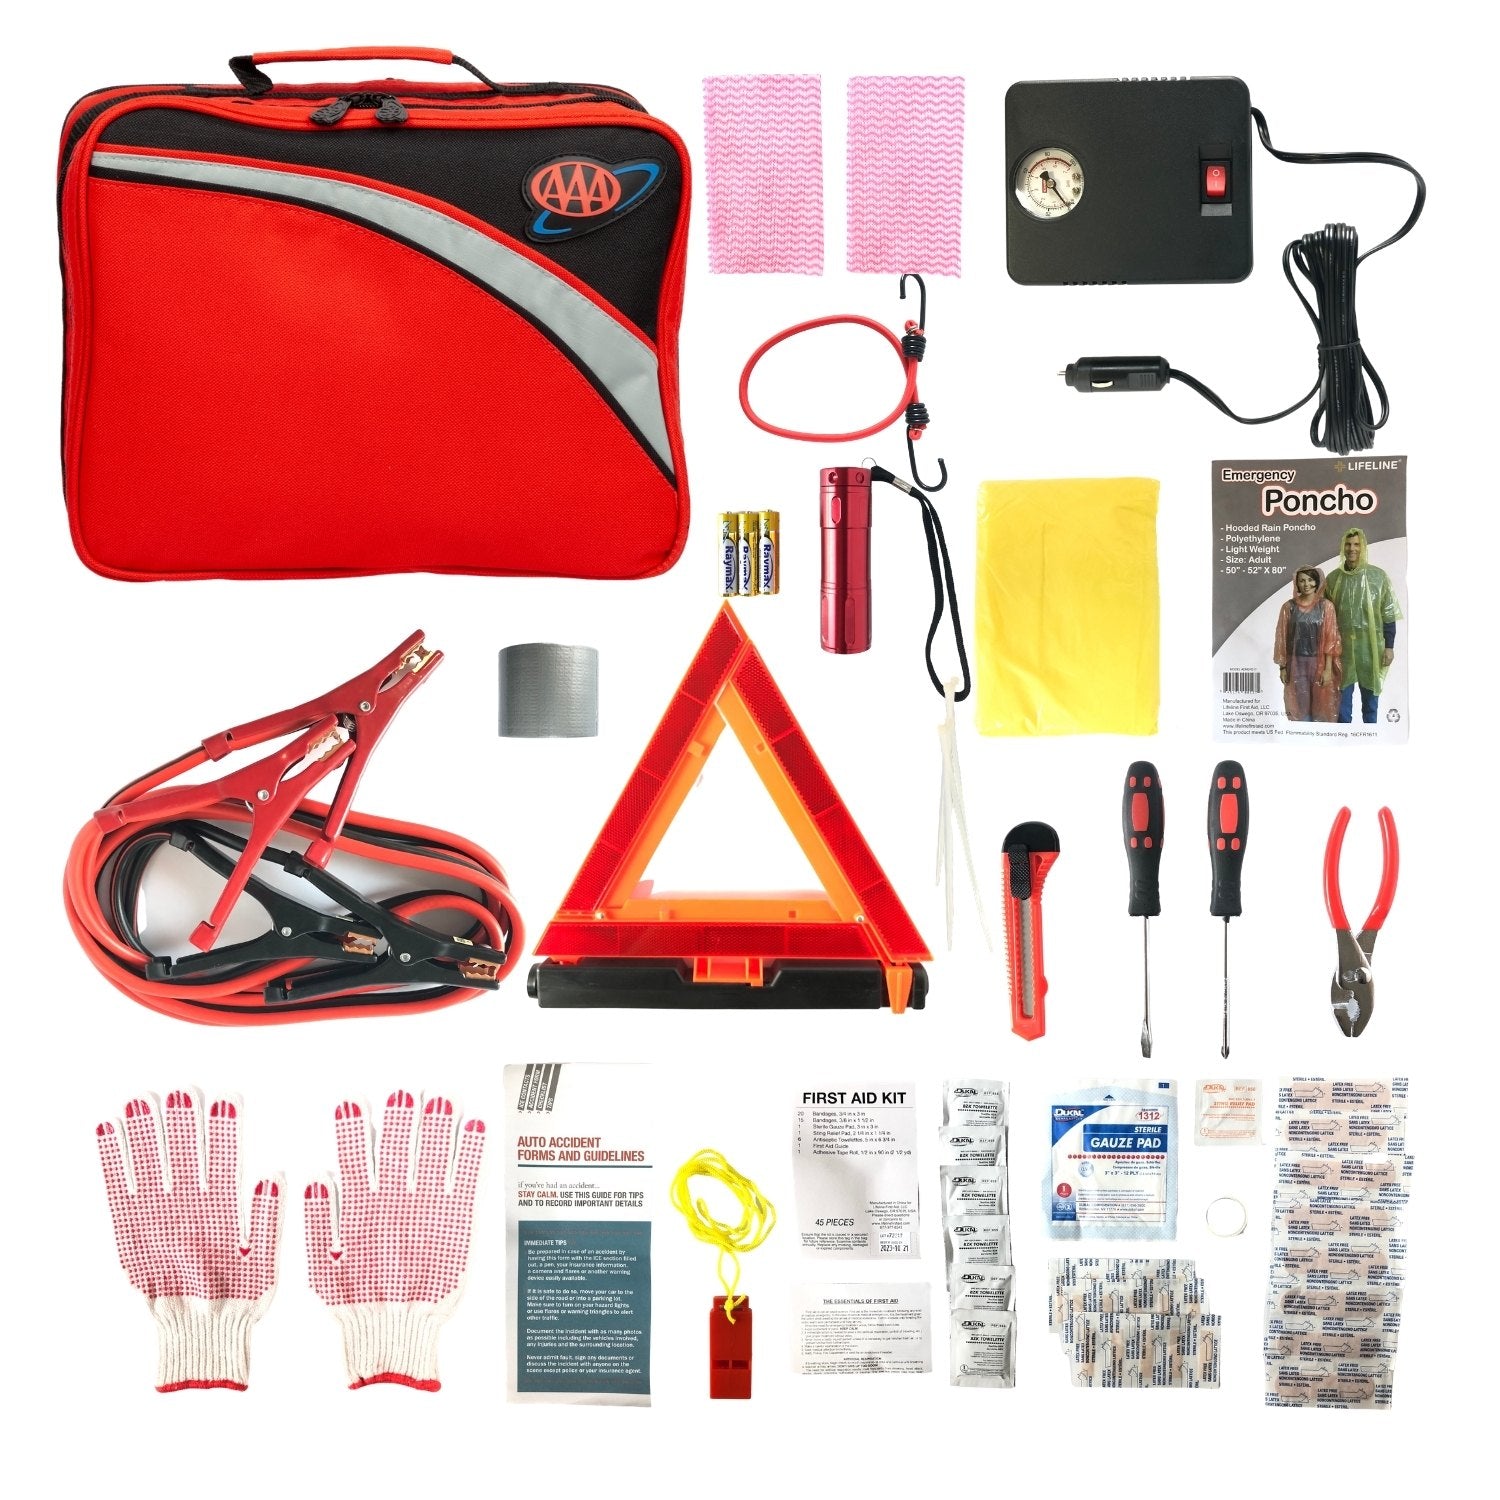  Thrive Roadside Emergency Car Kit - Safety Accessories